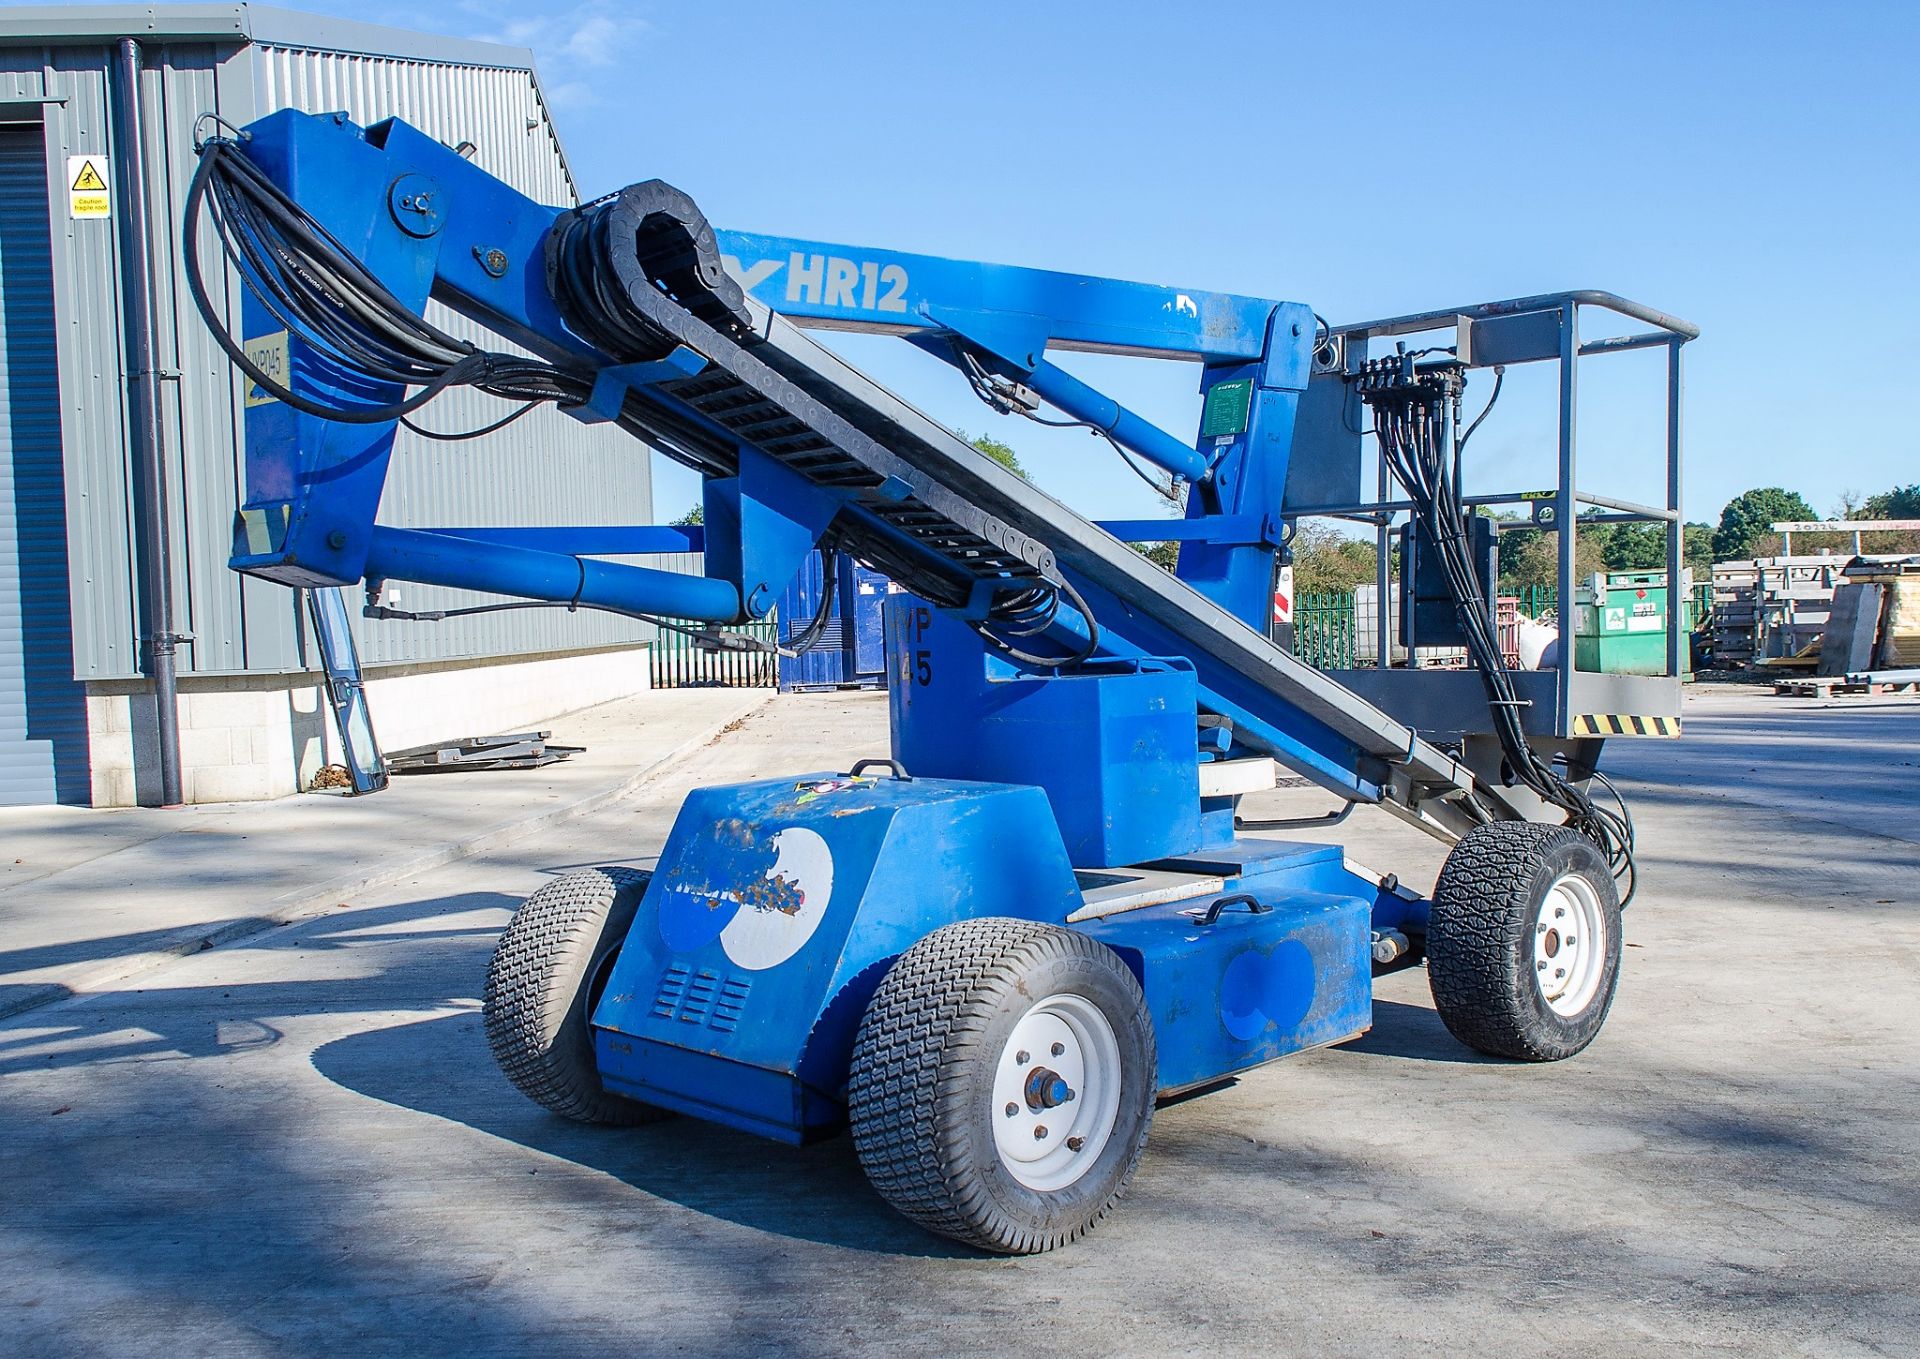 Nifty HR12 NDE diesel driven/battery electric articulated boom lift  Year: 2006  S/N: 12-13635 - Image 4 of 17